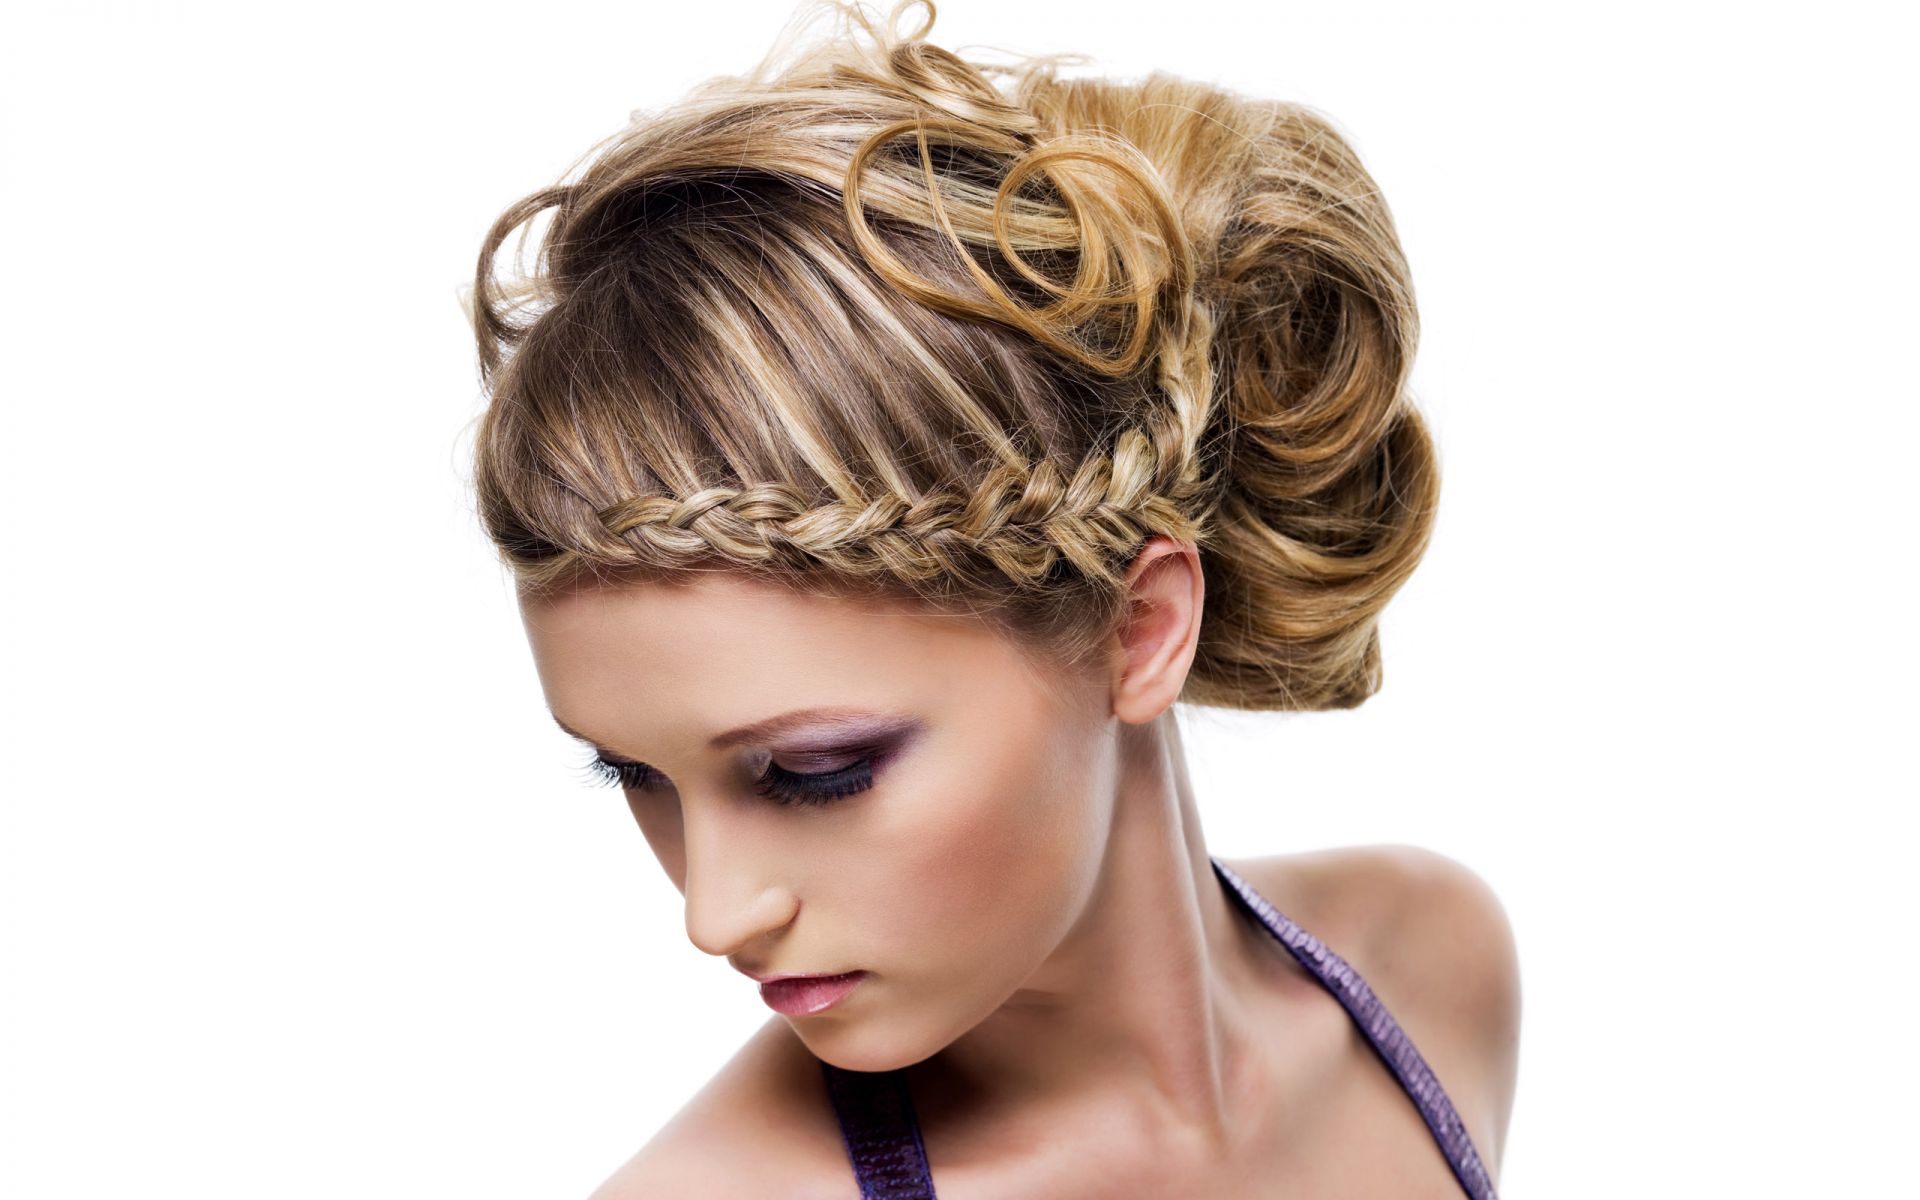 25 Beautiful Hairstyle To Make You Look WoW